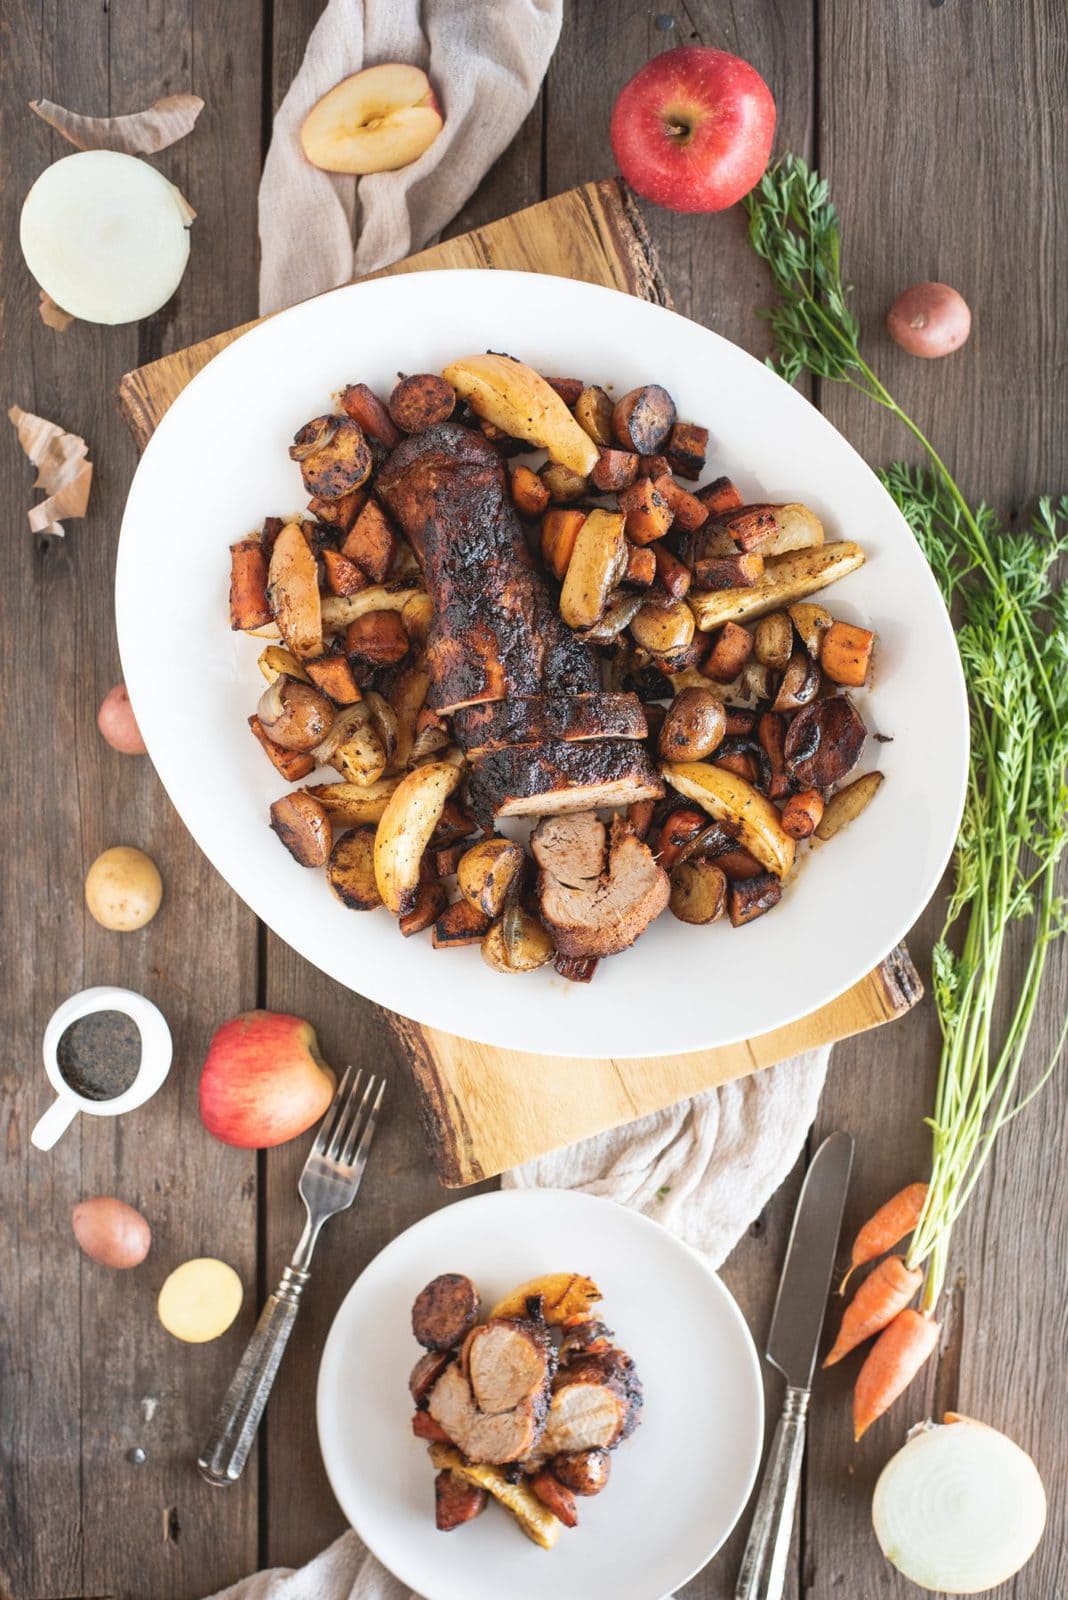 Picture of platter of Pork Tenderloin with Apples and Root Vegetables on wood background